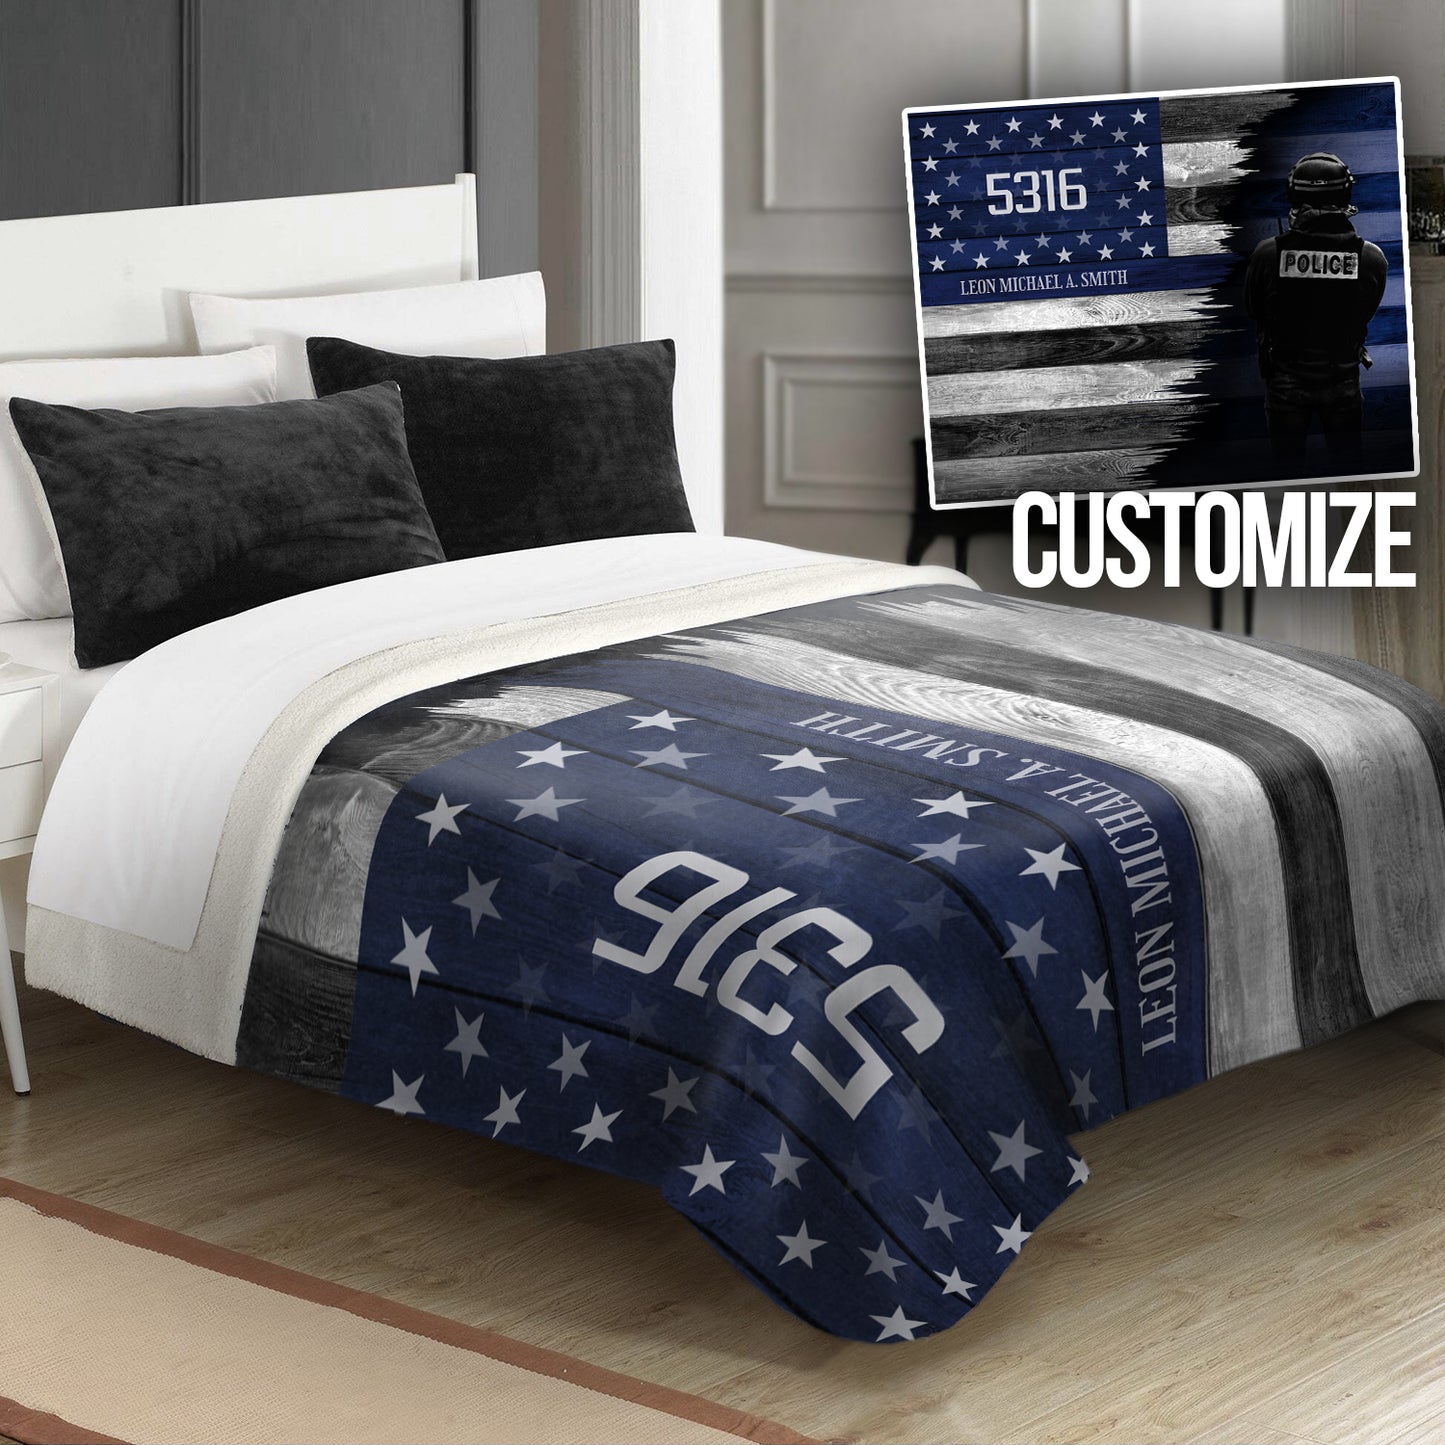 Thin Blue Line Personalized Blanket